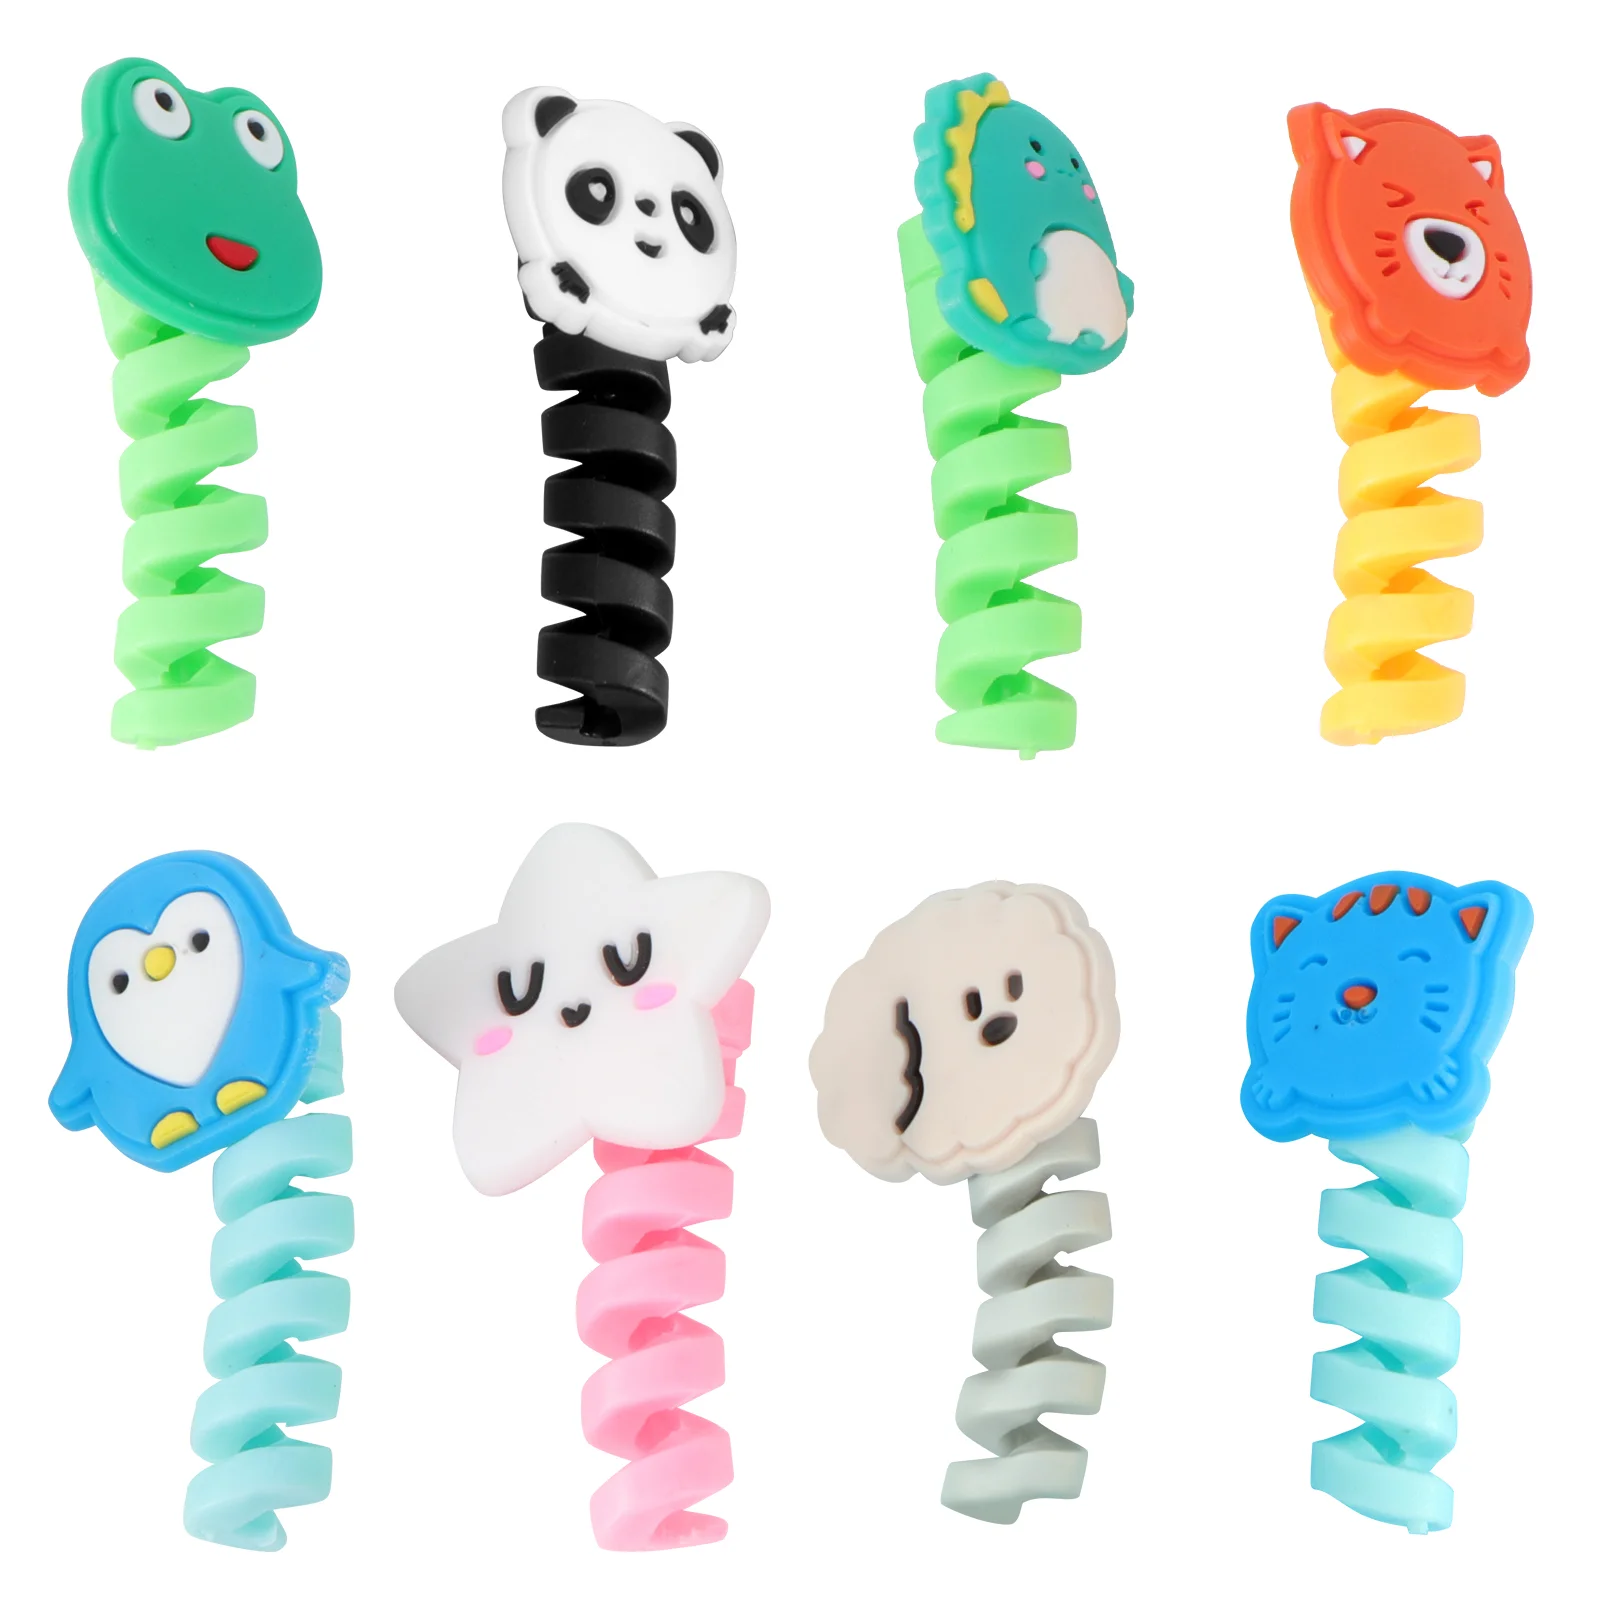 

24 Pcs Data Line Protector Mobile Chargers Cartoon Cable Winders Wire Protectors Wrappers Silica Gel Adorable Organizers